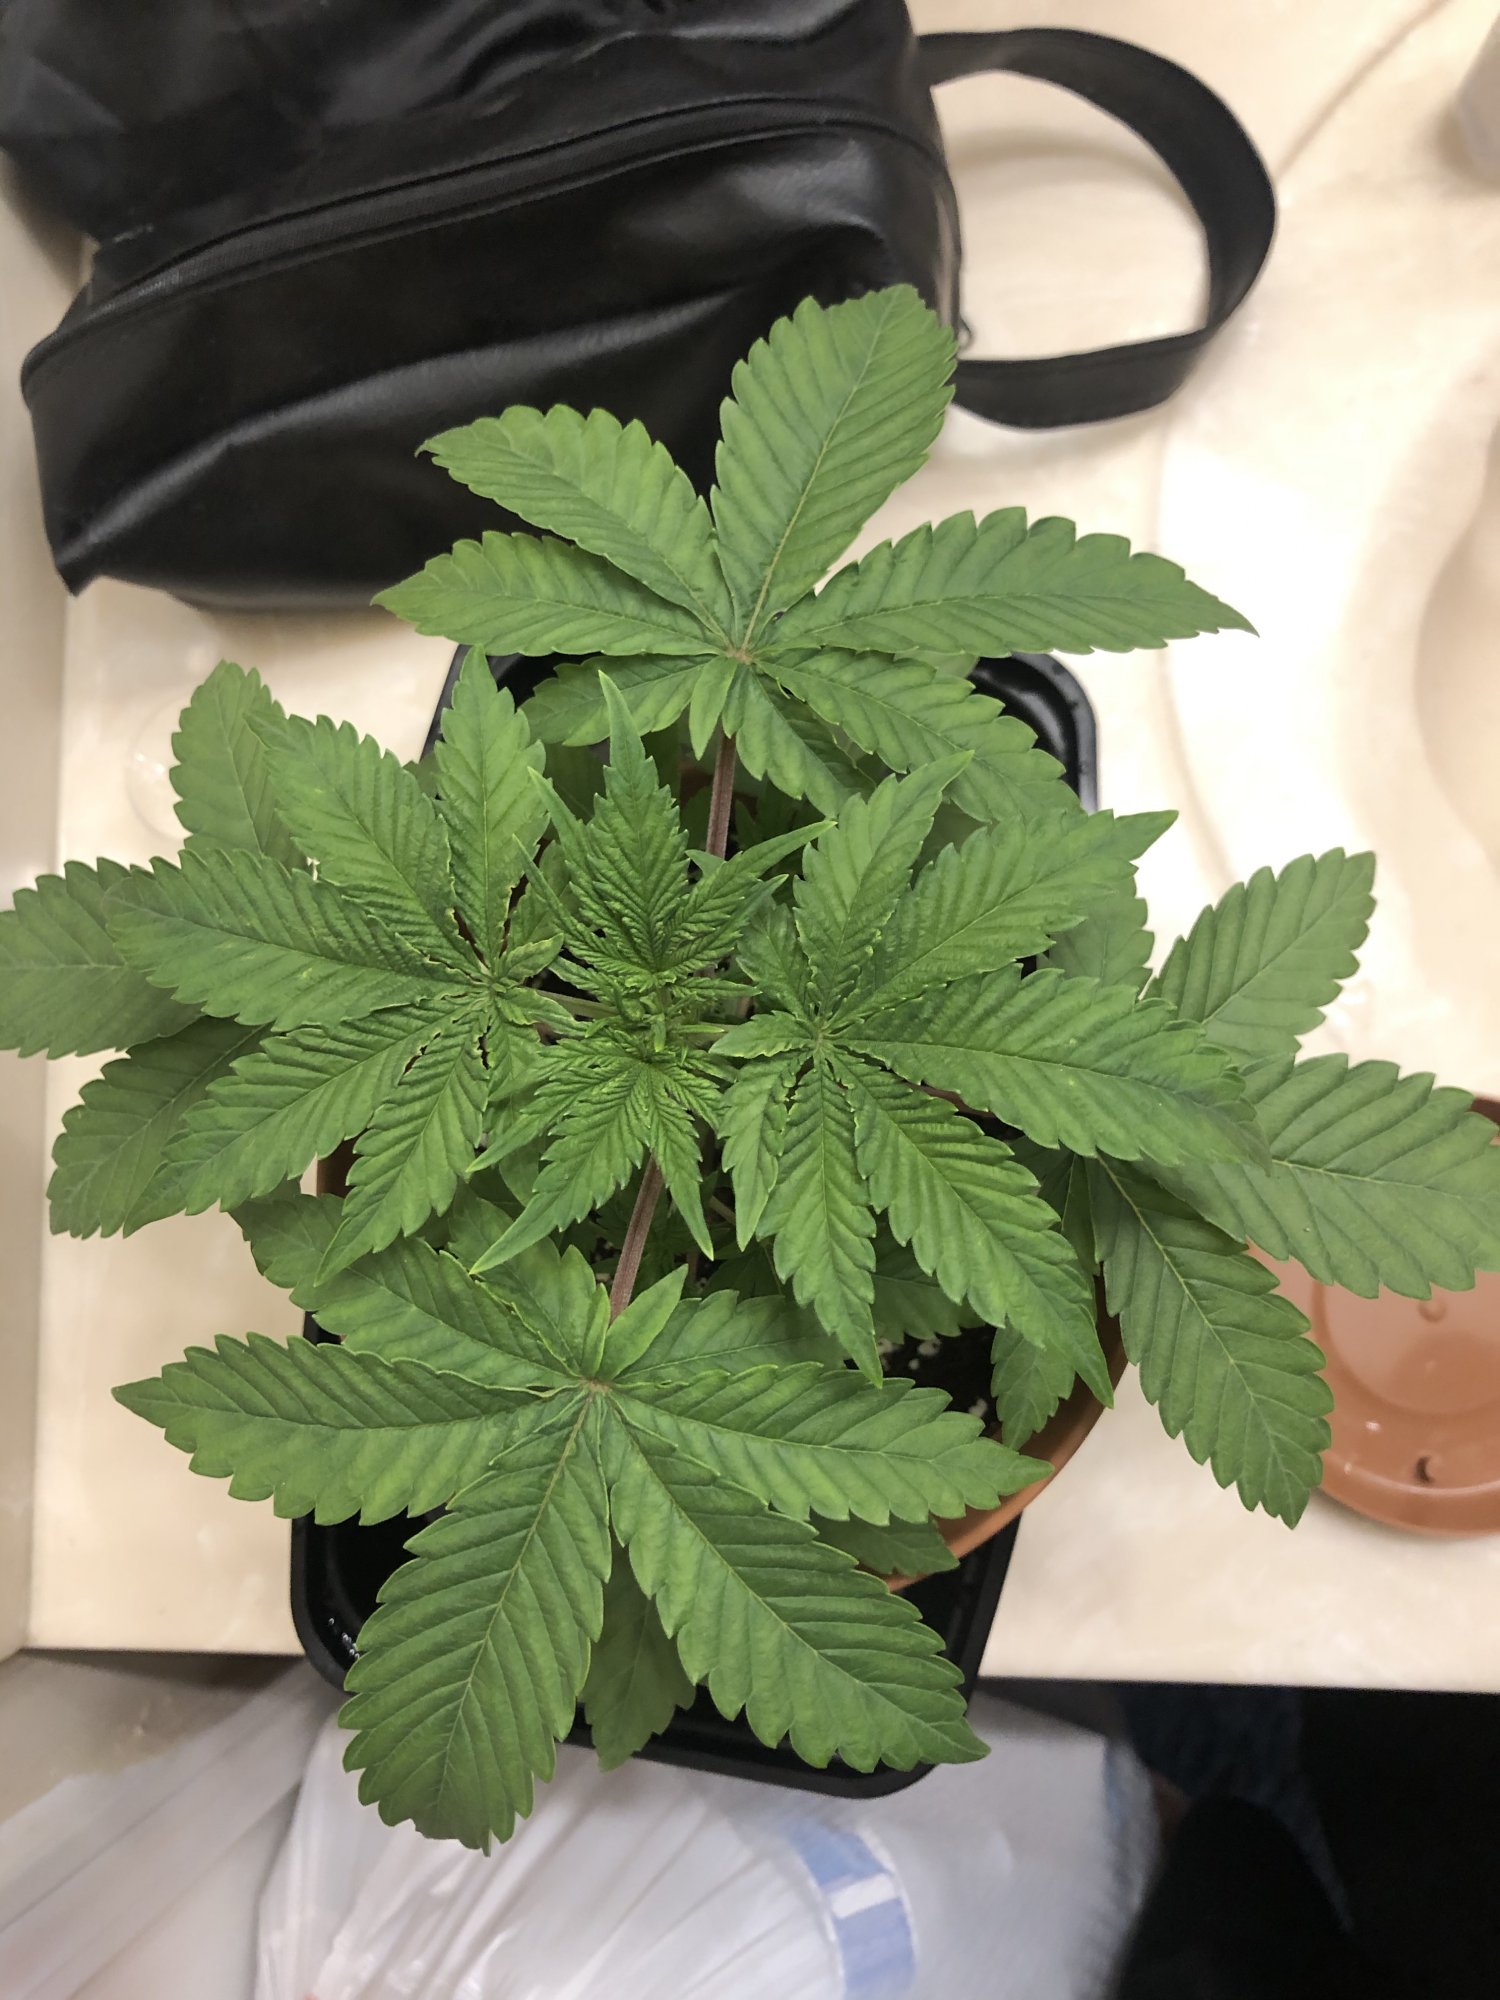 Whats wrong with my plant 3